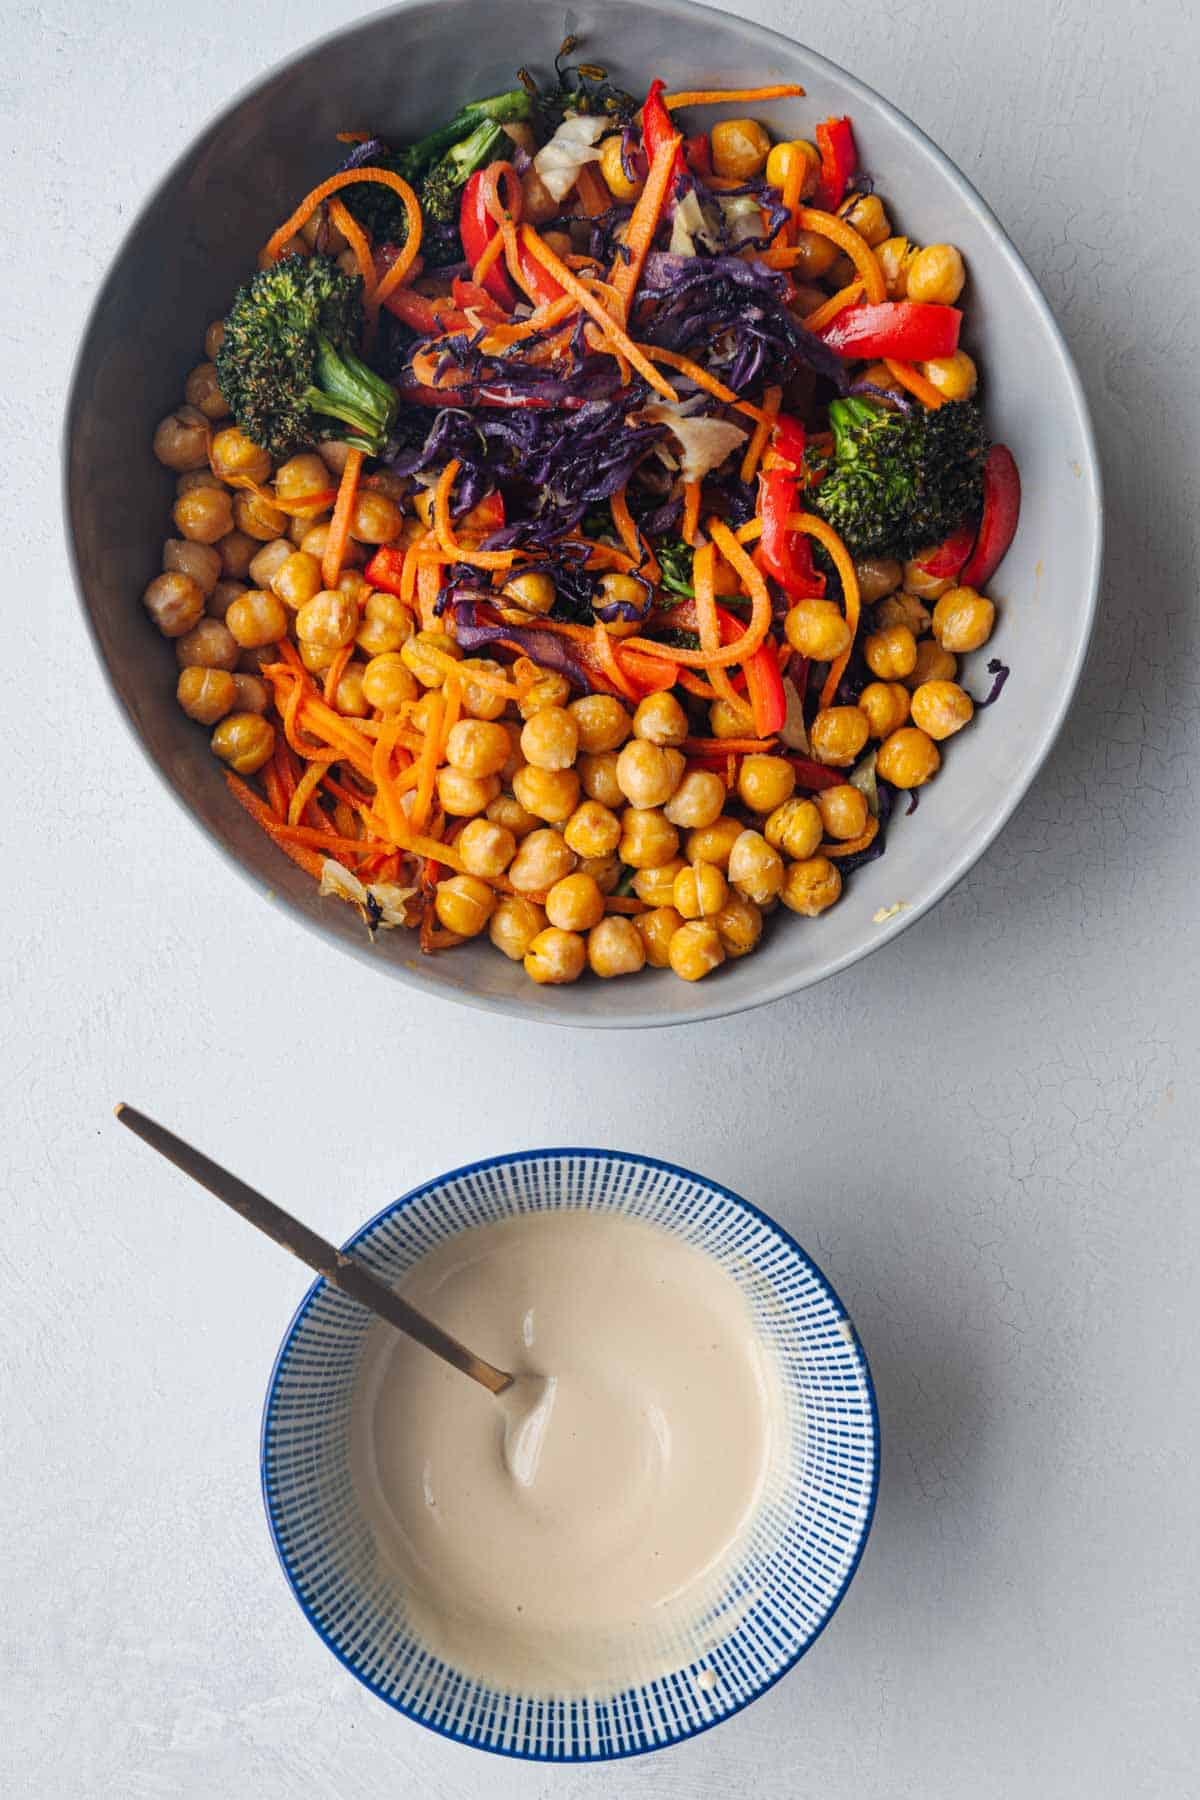 Roasted vegetable salad with chickpeas and broccoli next to a bowl with tahini dressing.